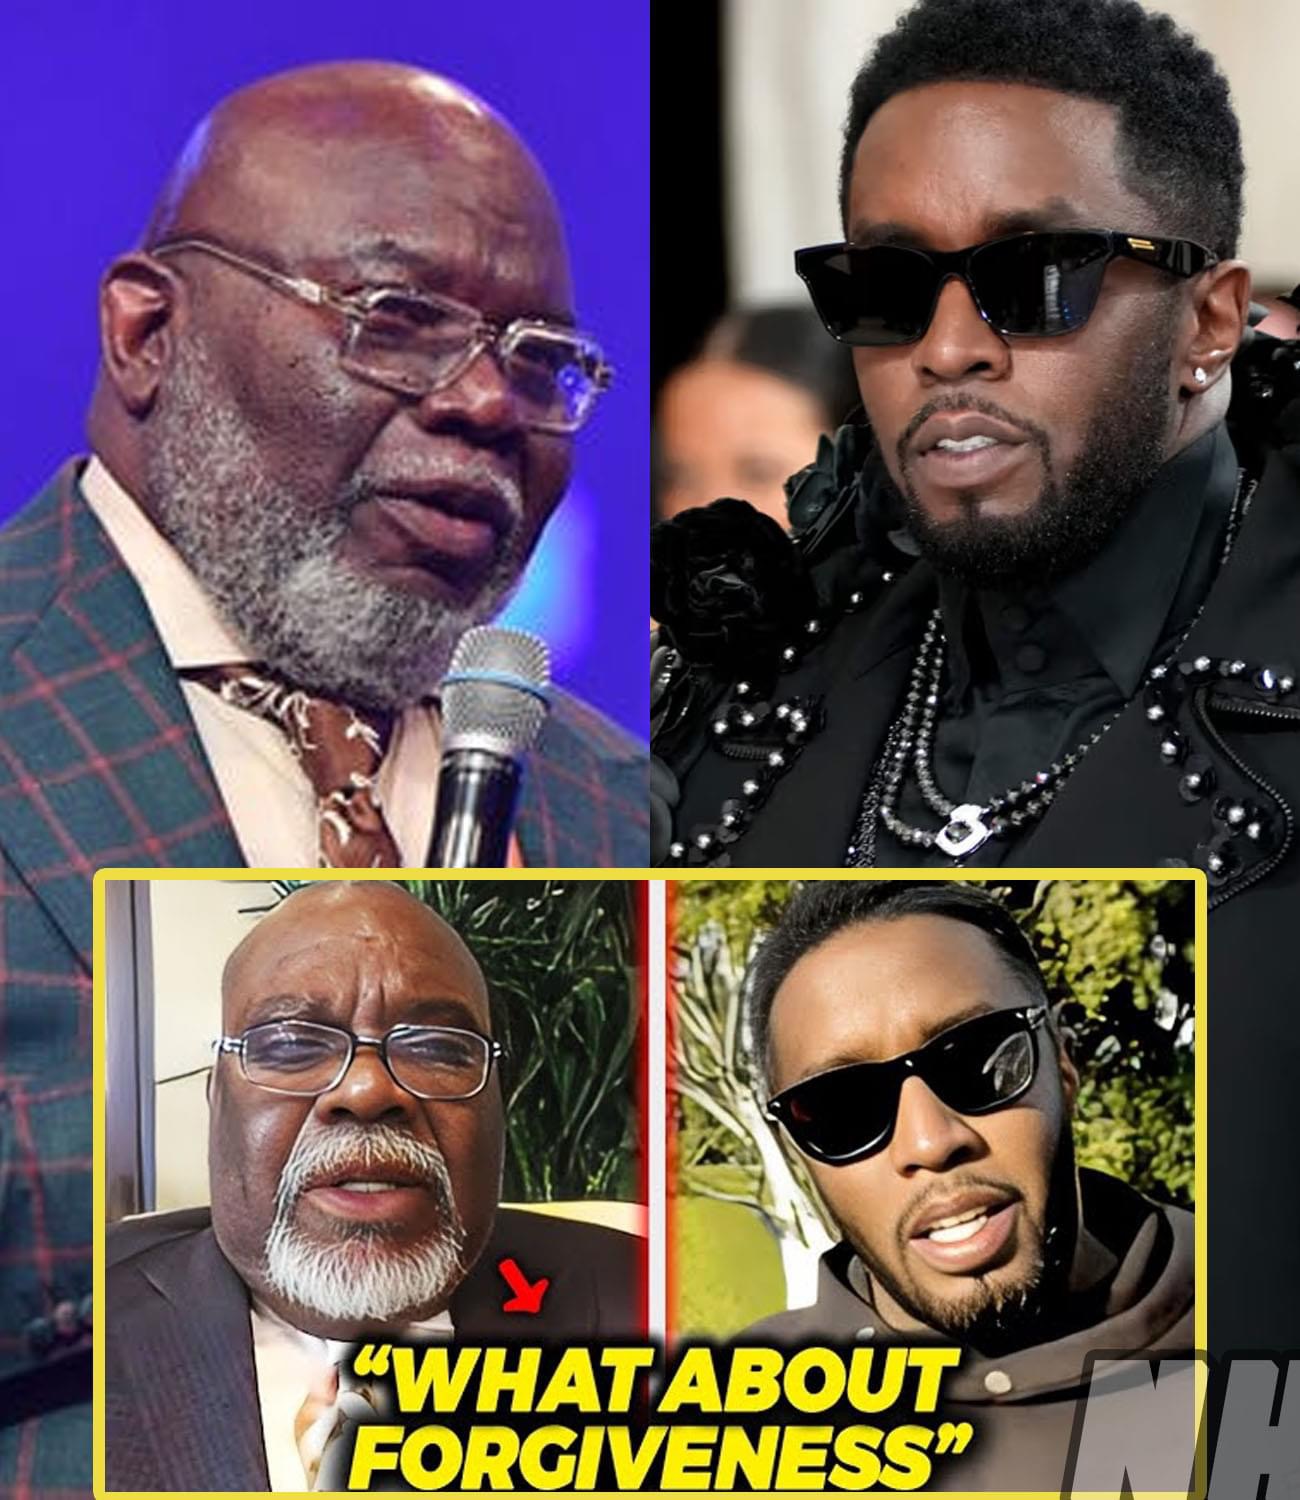 7 MINUTES AGO: TD Jakes Burst Into Tears After Diddy Takes A Legal Action Against Him